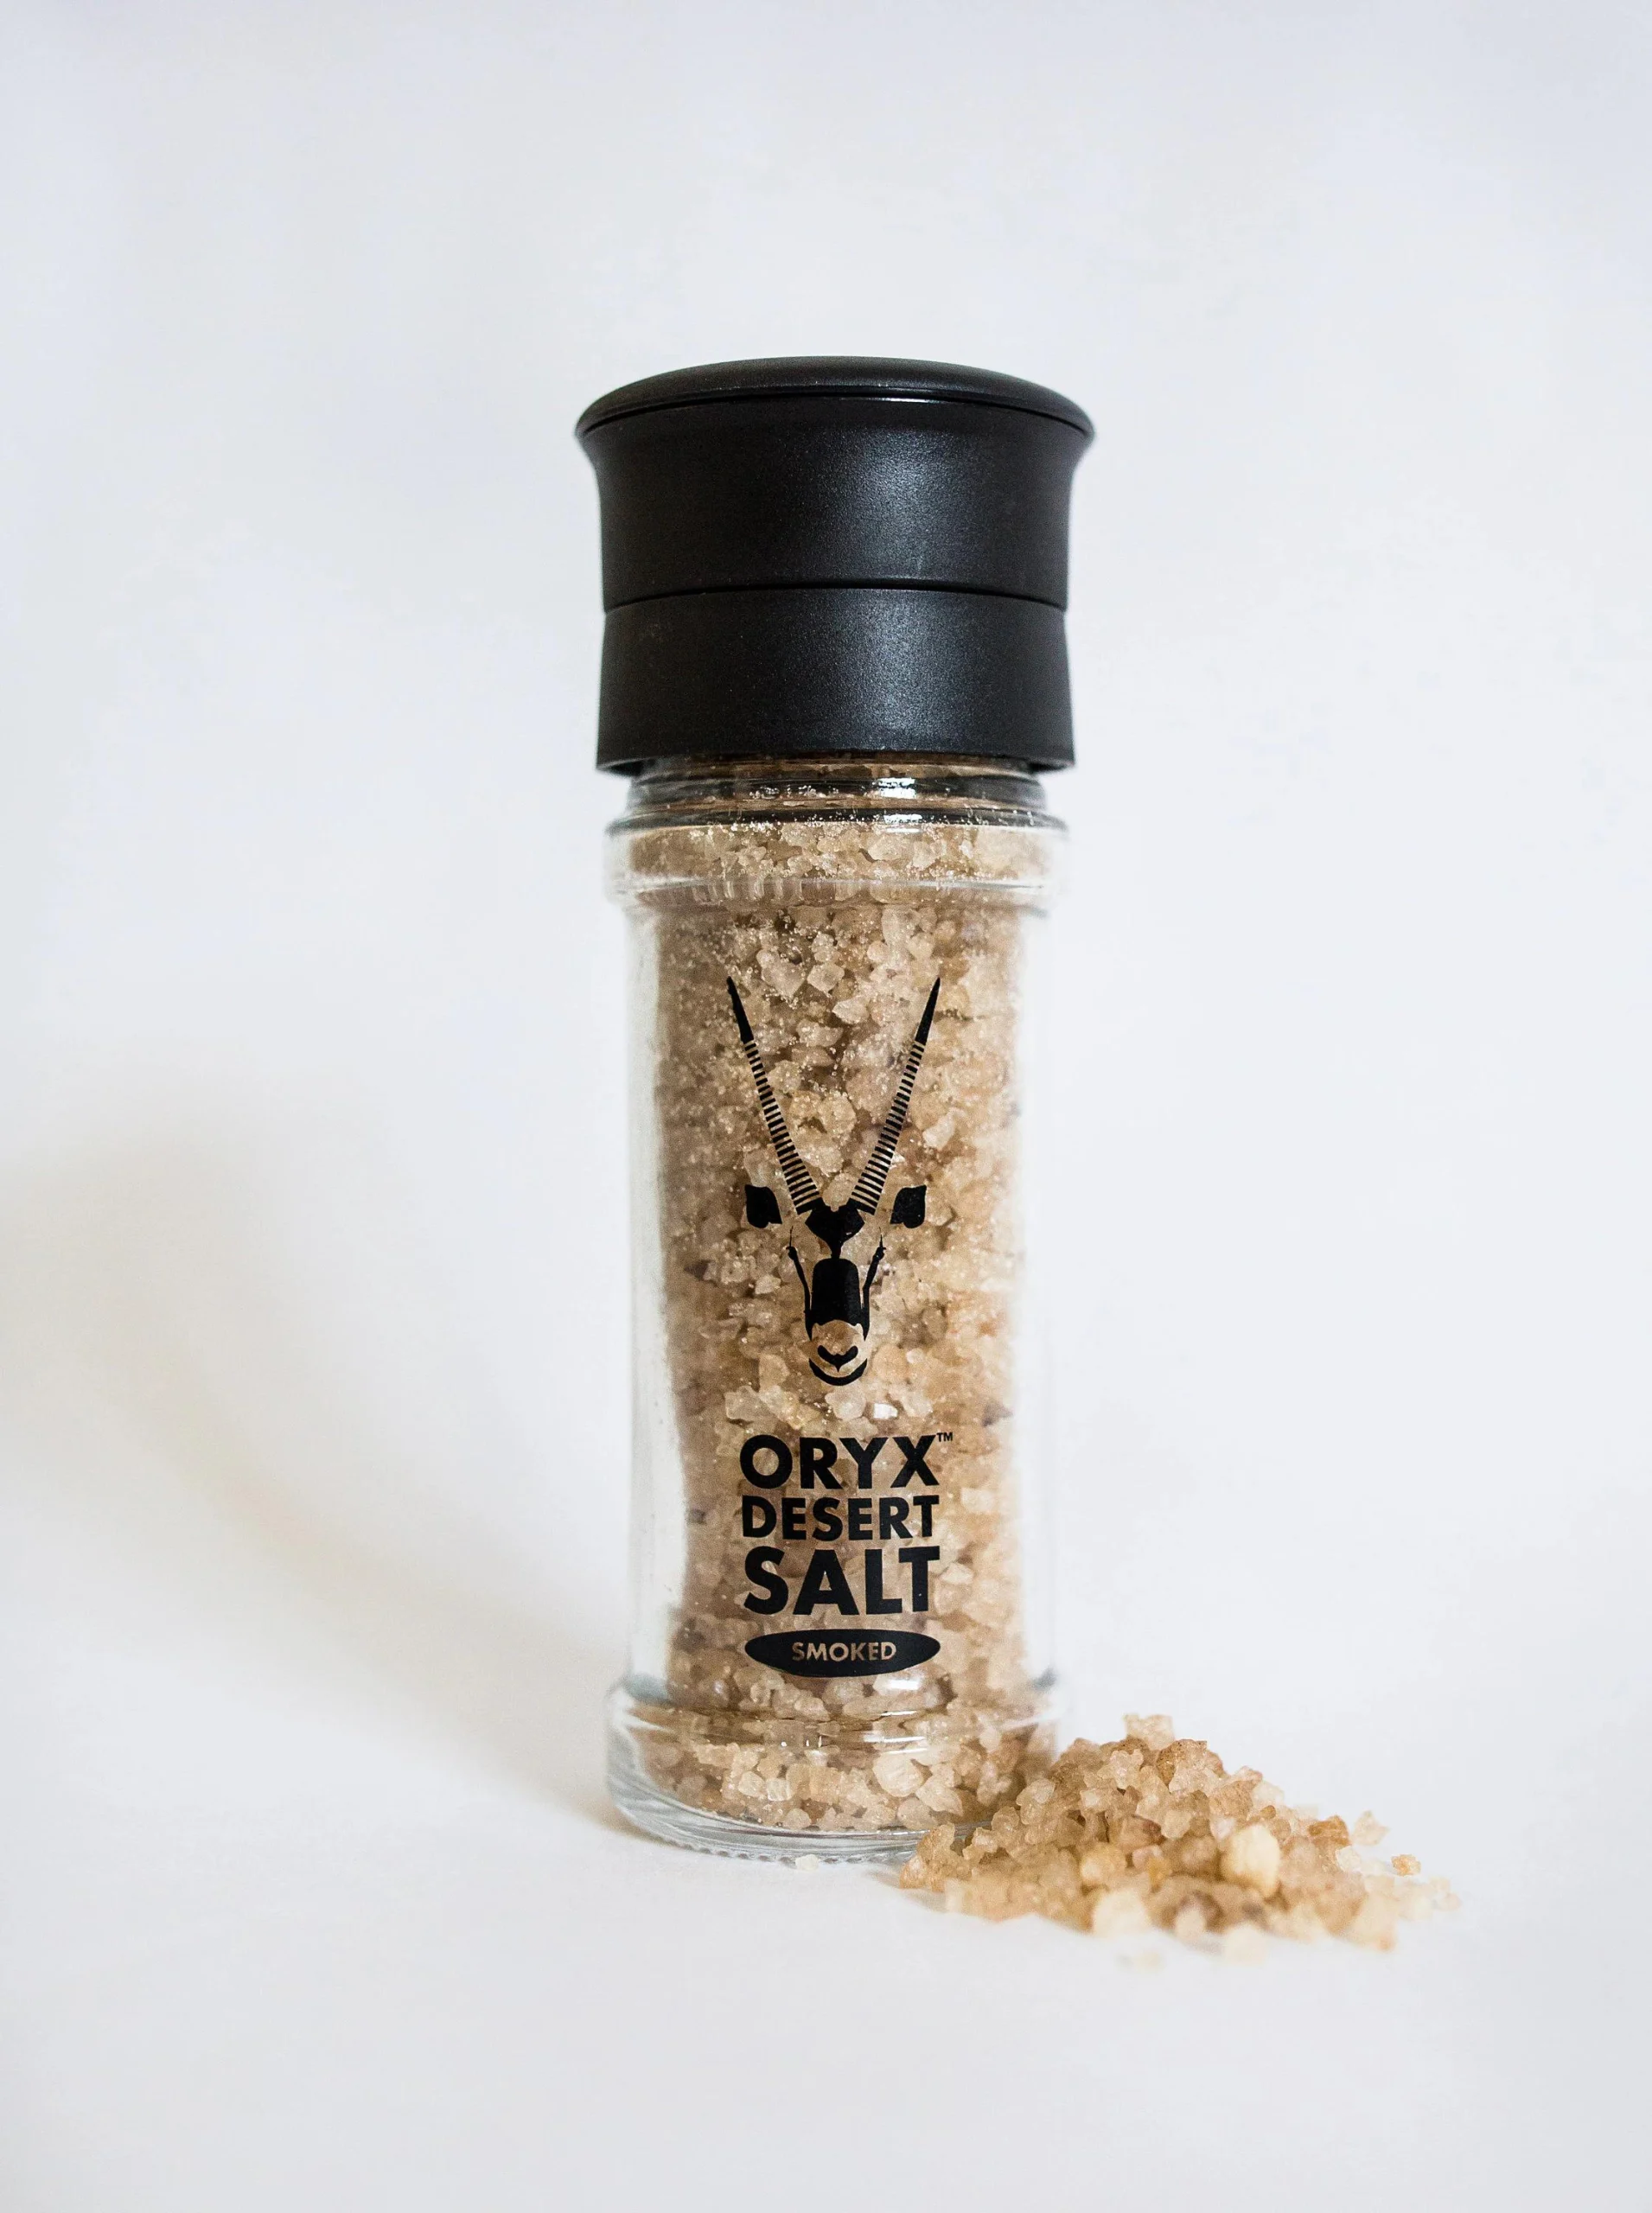 oryx smoked salt - What is oryx desert salt used for